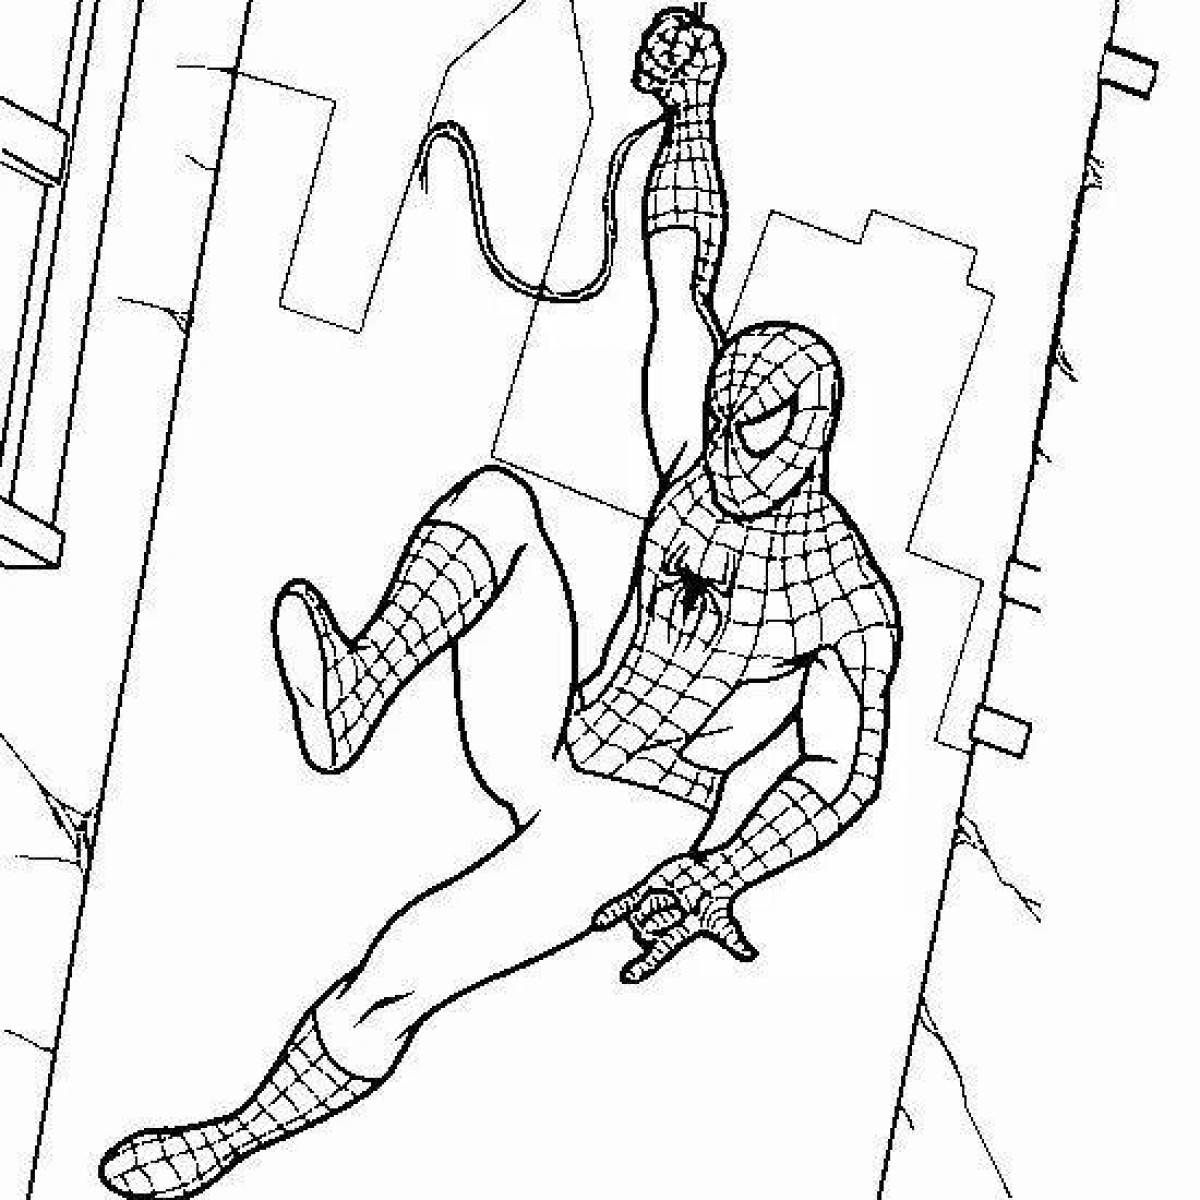 Spiderman's intriguing coloring game